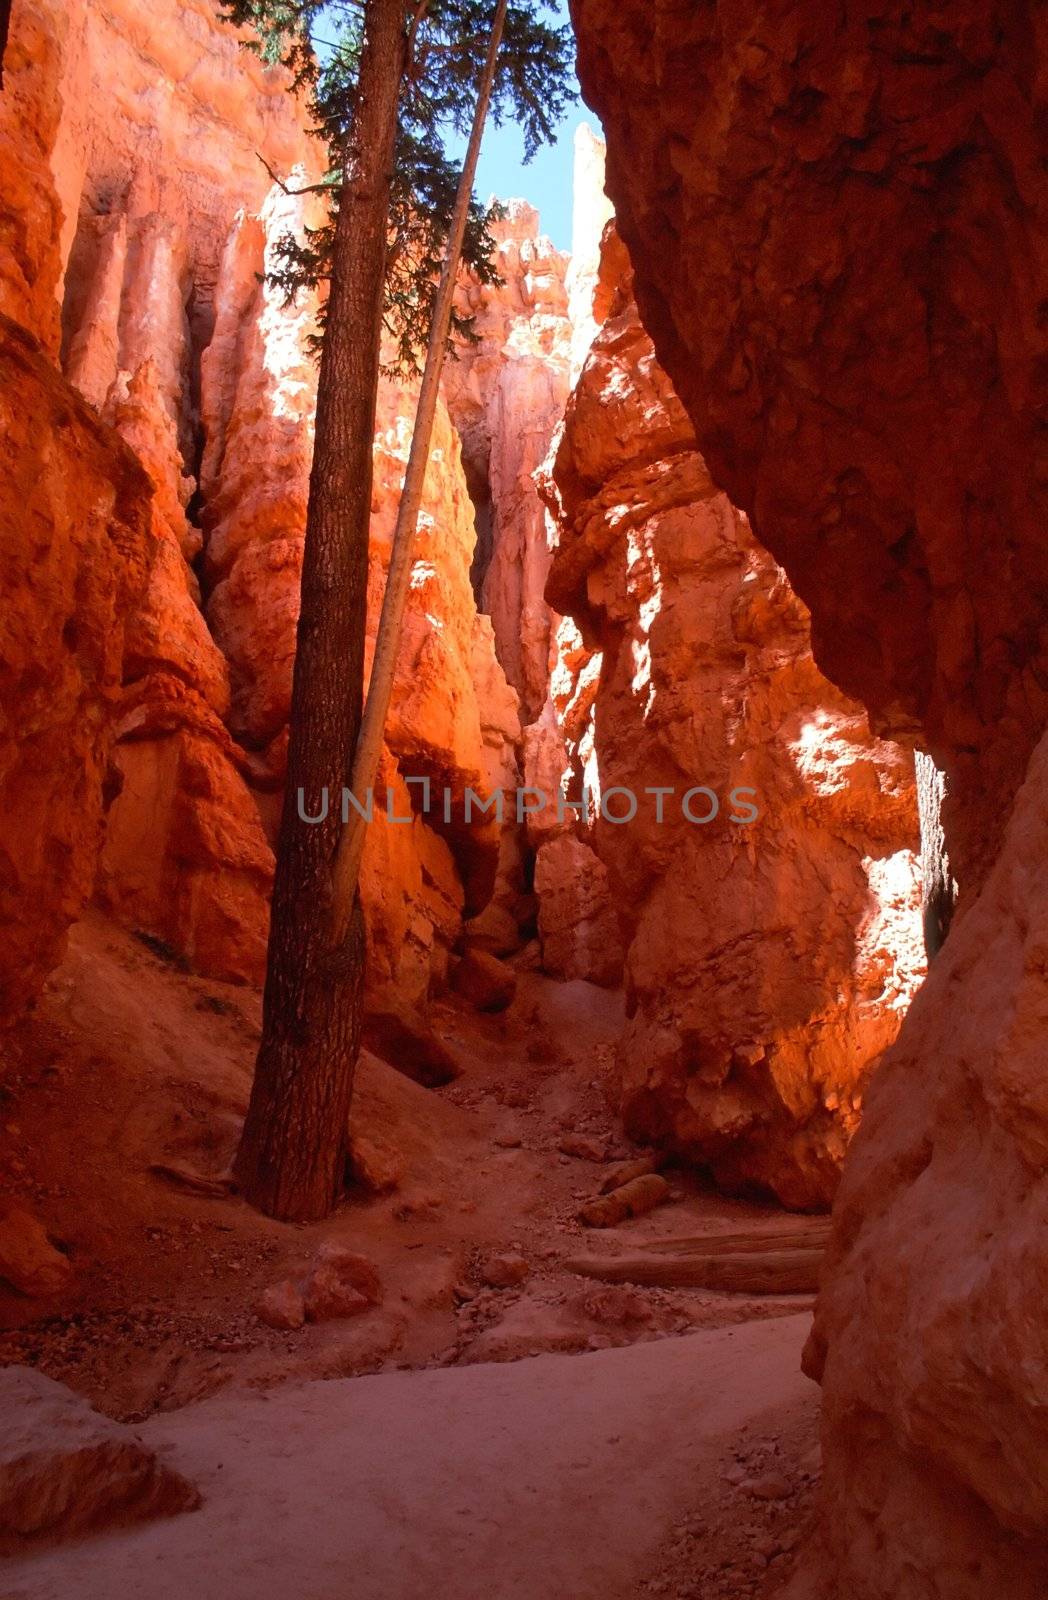 Bryce Canyon National Park is a national park located in southwestern Utah in the United States.